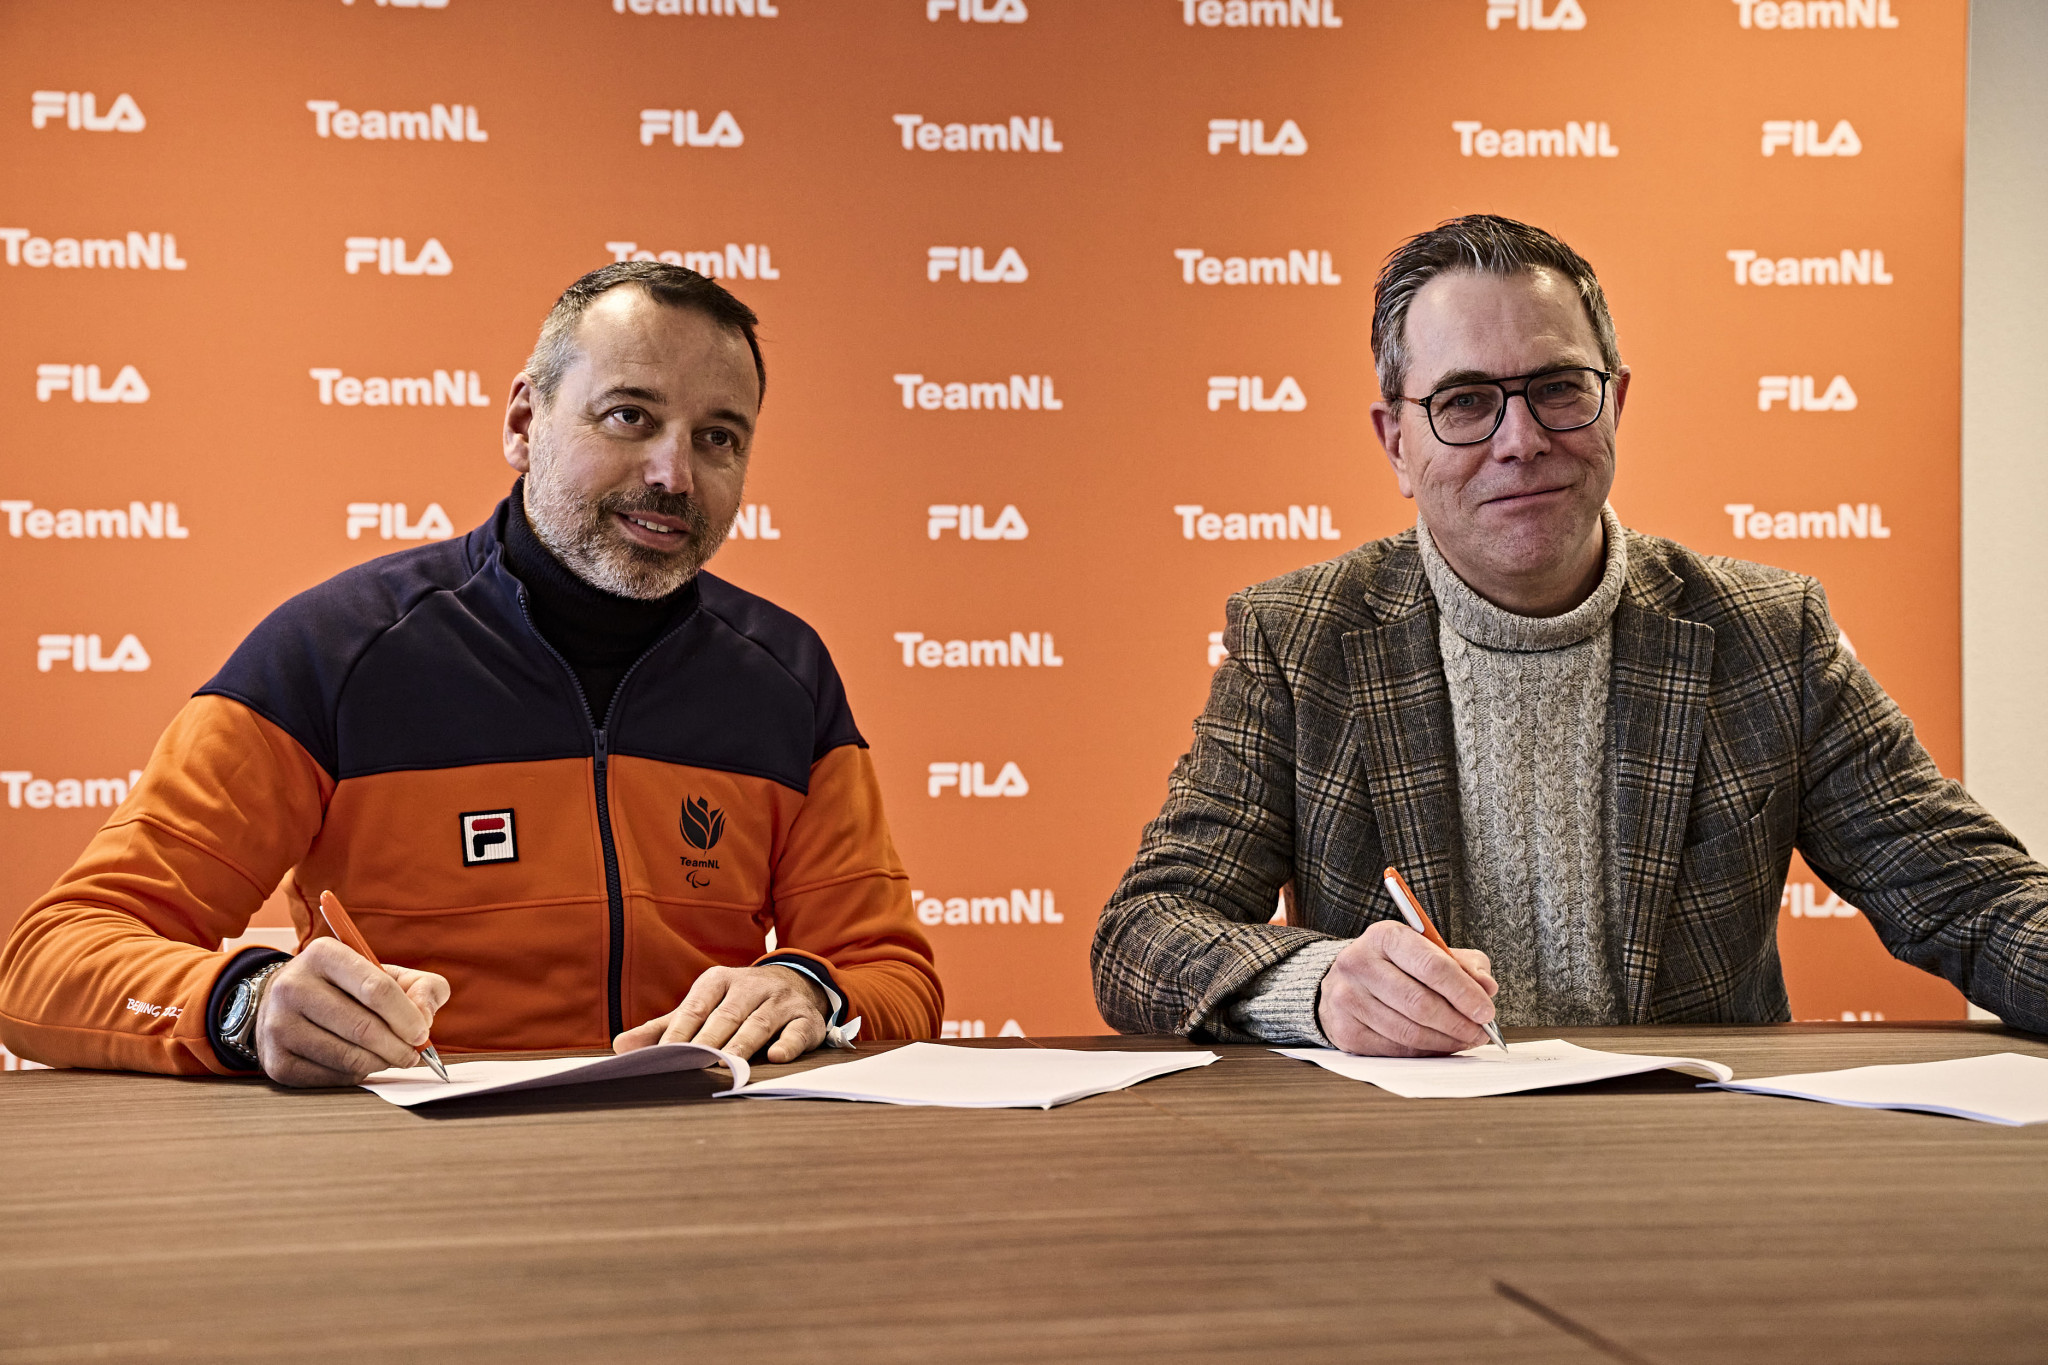 FILA's extended deal with the NOC*NSF is set to cover the Paris 2024 and Milan-Cortina 2026 Olympics and Paralympics ©FILA